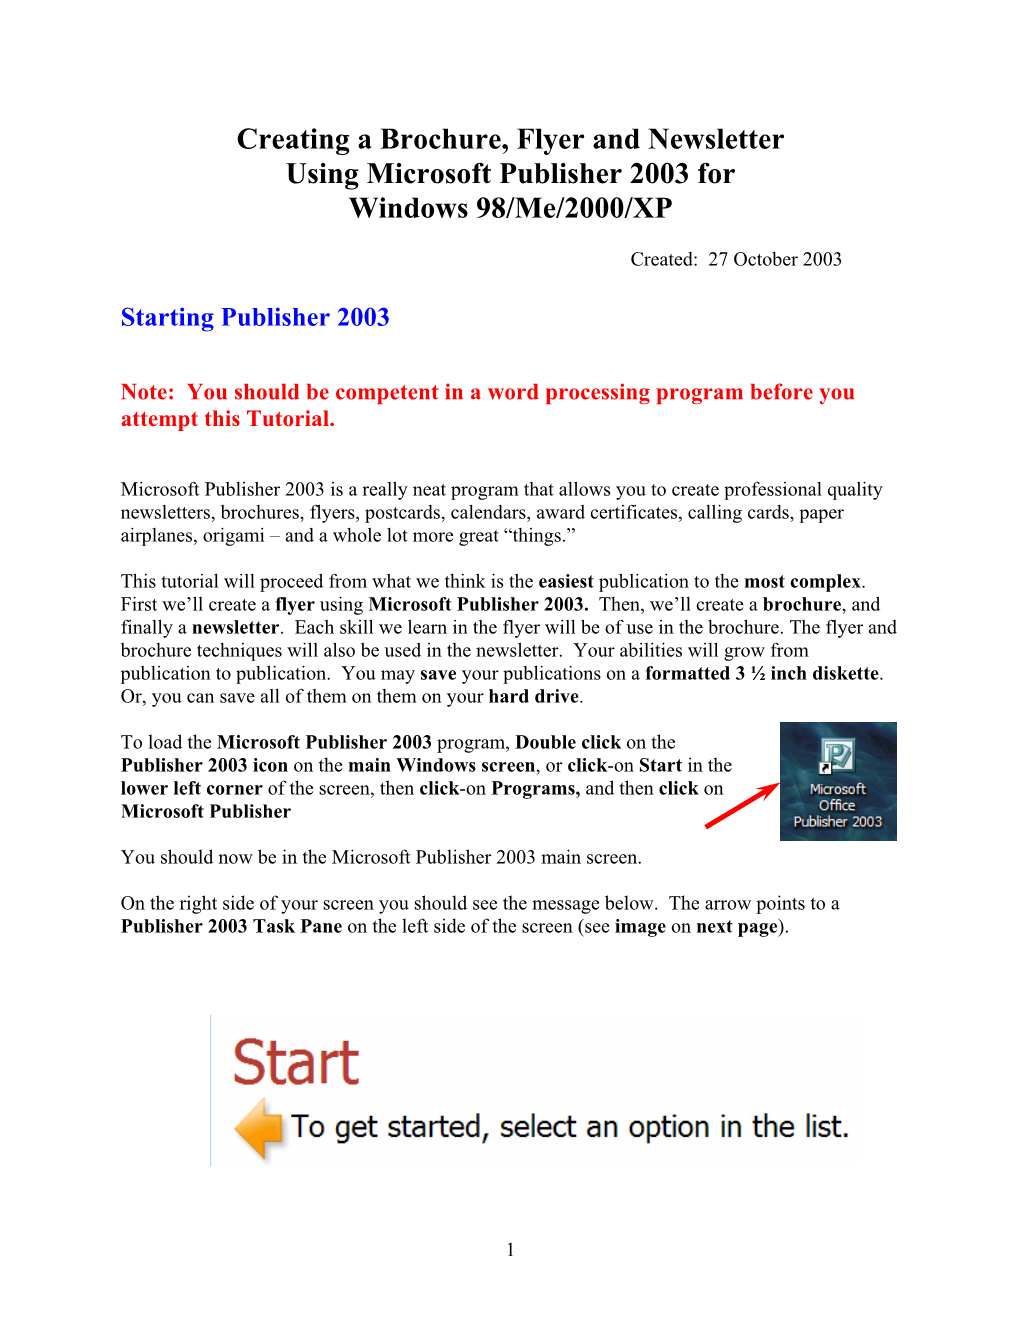 Creating a Brochure, Flyer and Newsletter Using Microsoft Publisher 2003 for Windows 98/Me/2000/XP